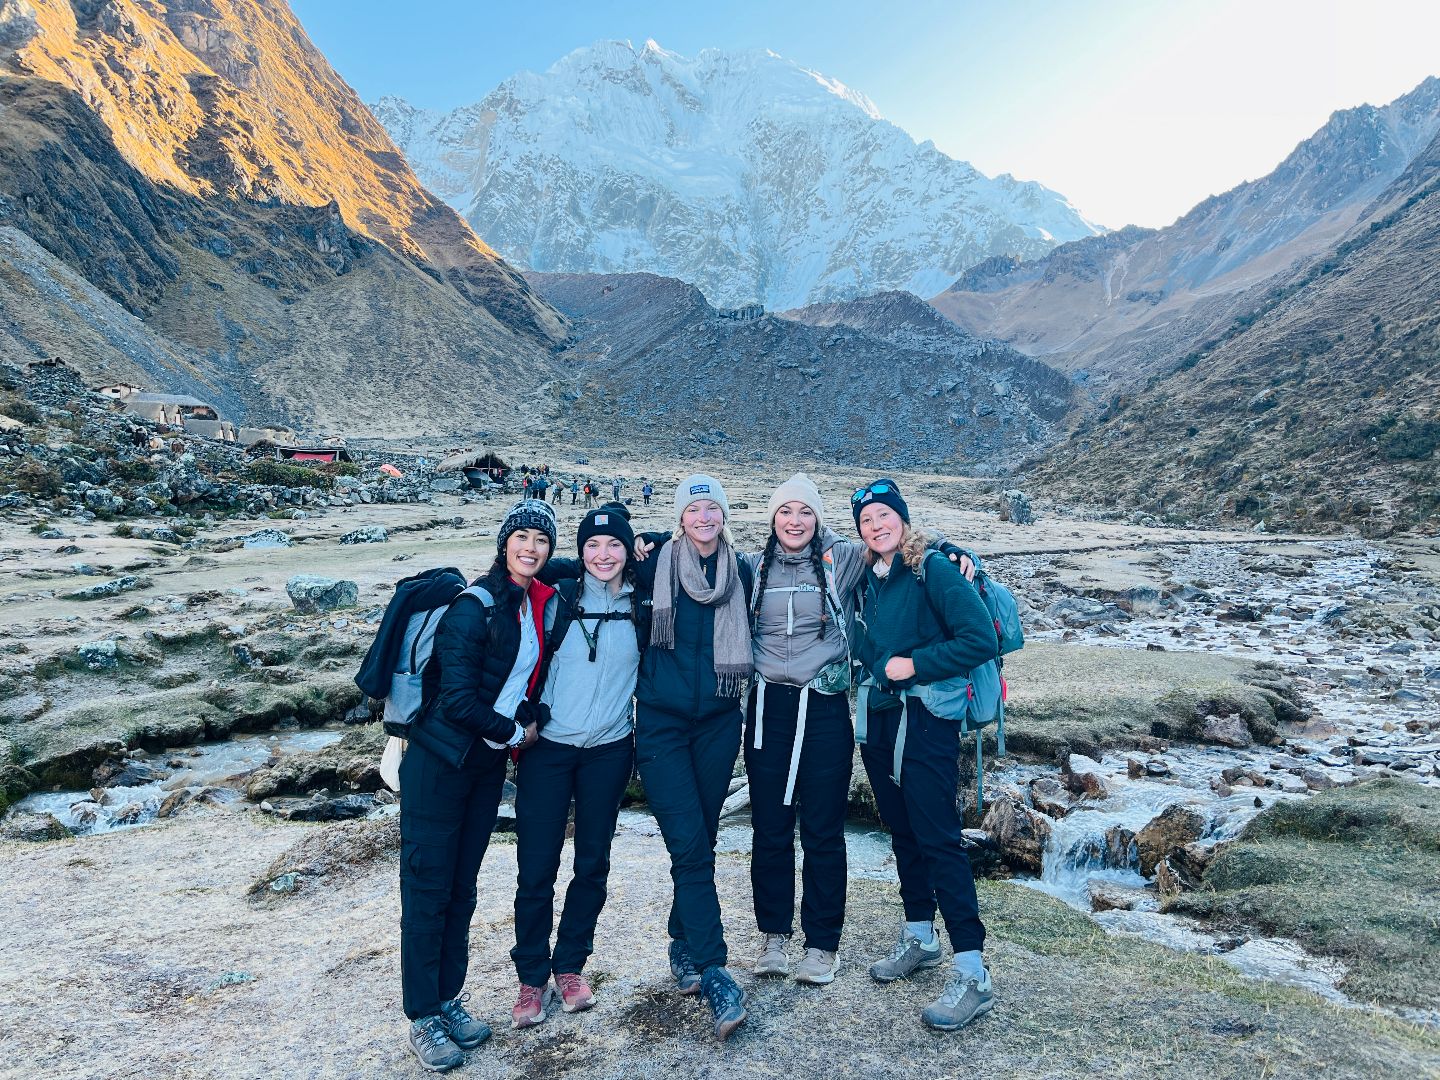 Madalyn with fellow students hiking in Peru